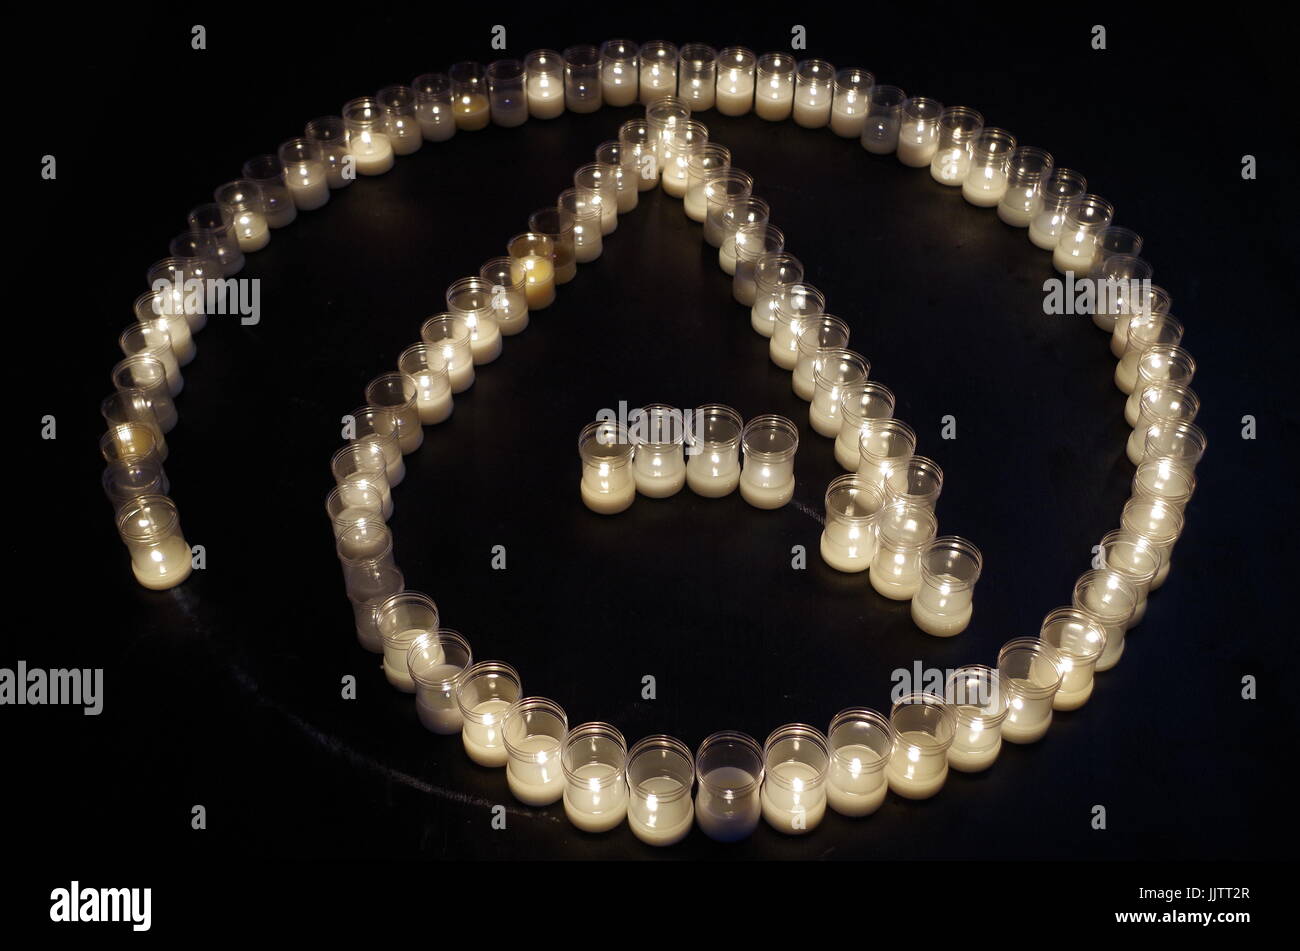 Atheism symbol made with candles. Religion and spirituality Stock Photo